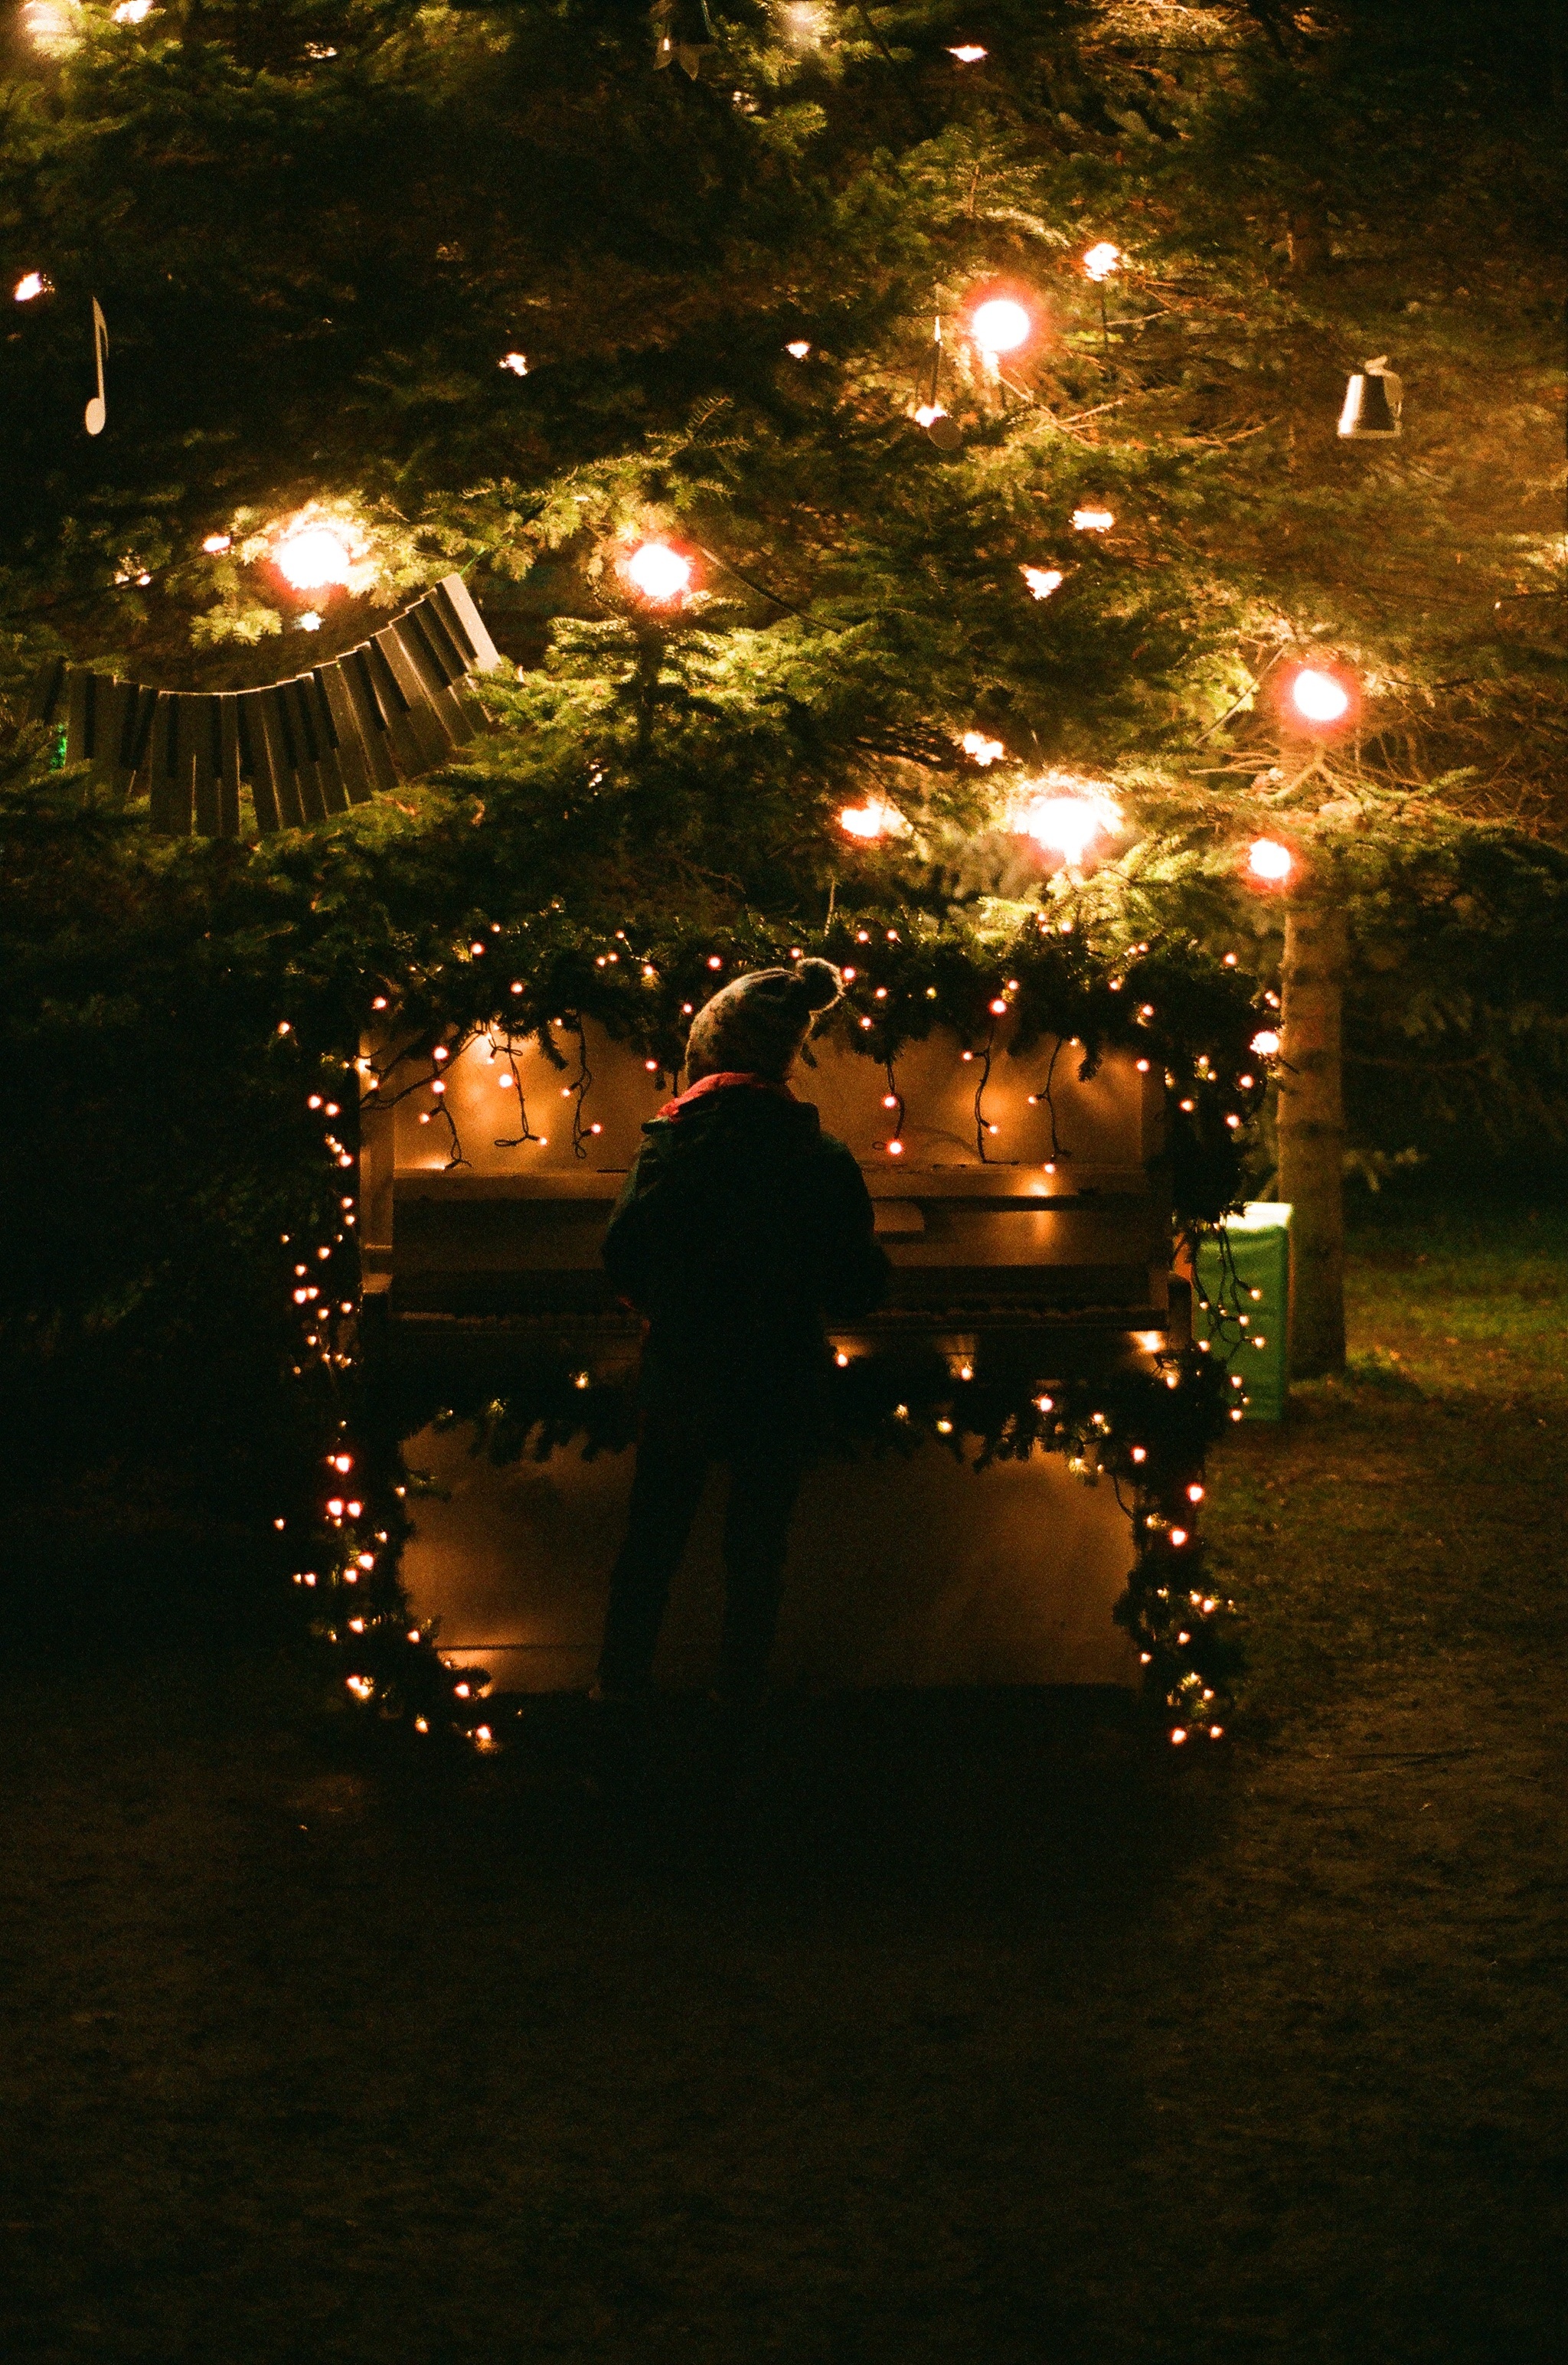 A person playing a decorated piano with garlands and Christmas lights